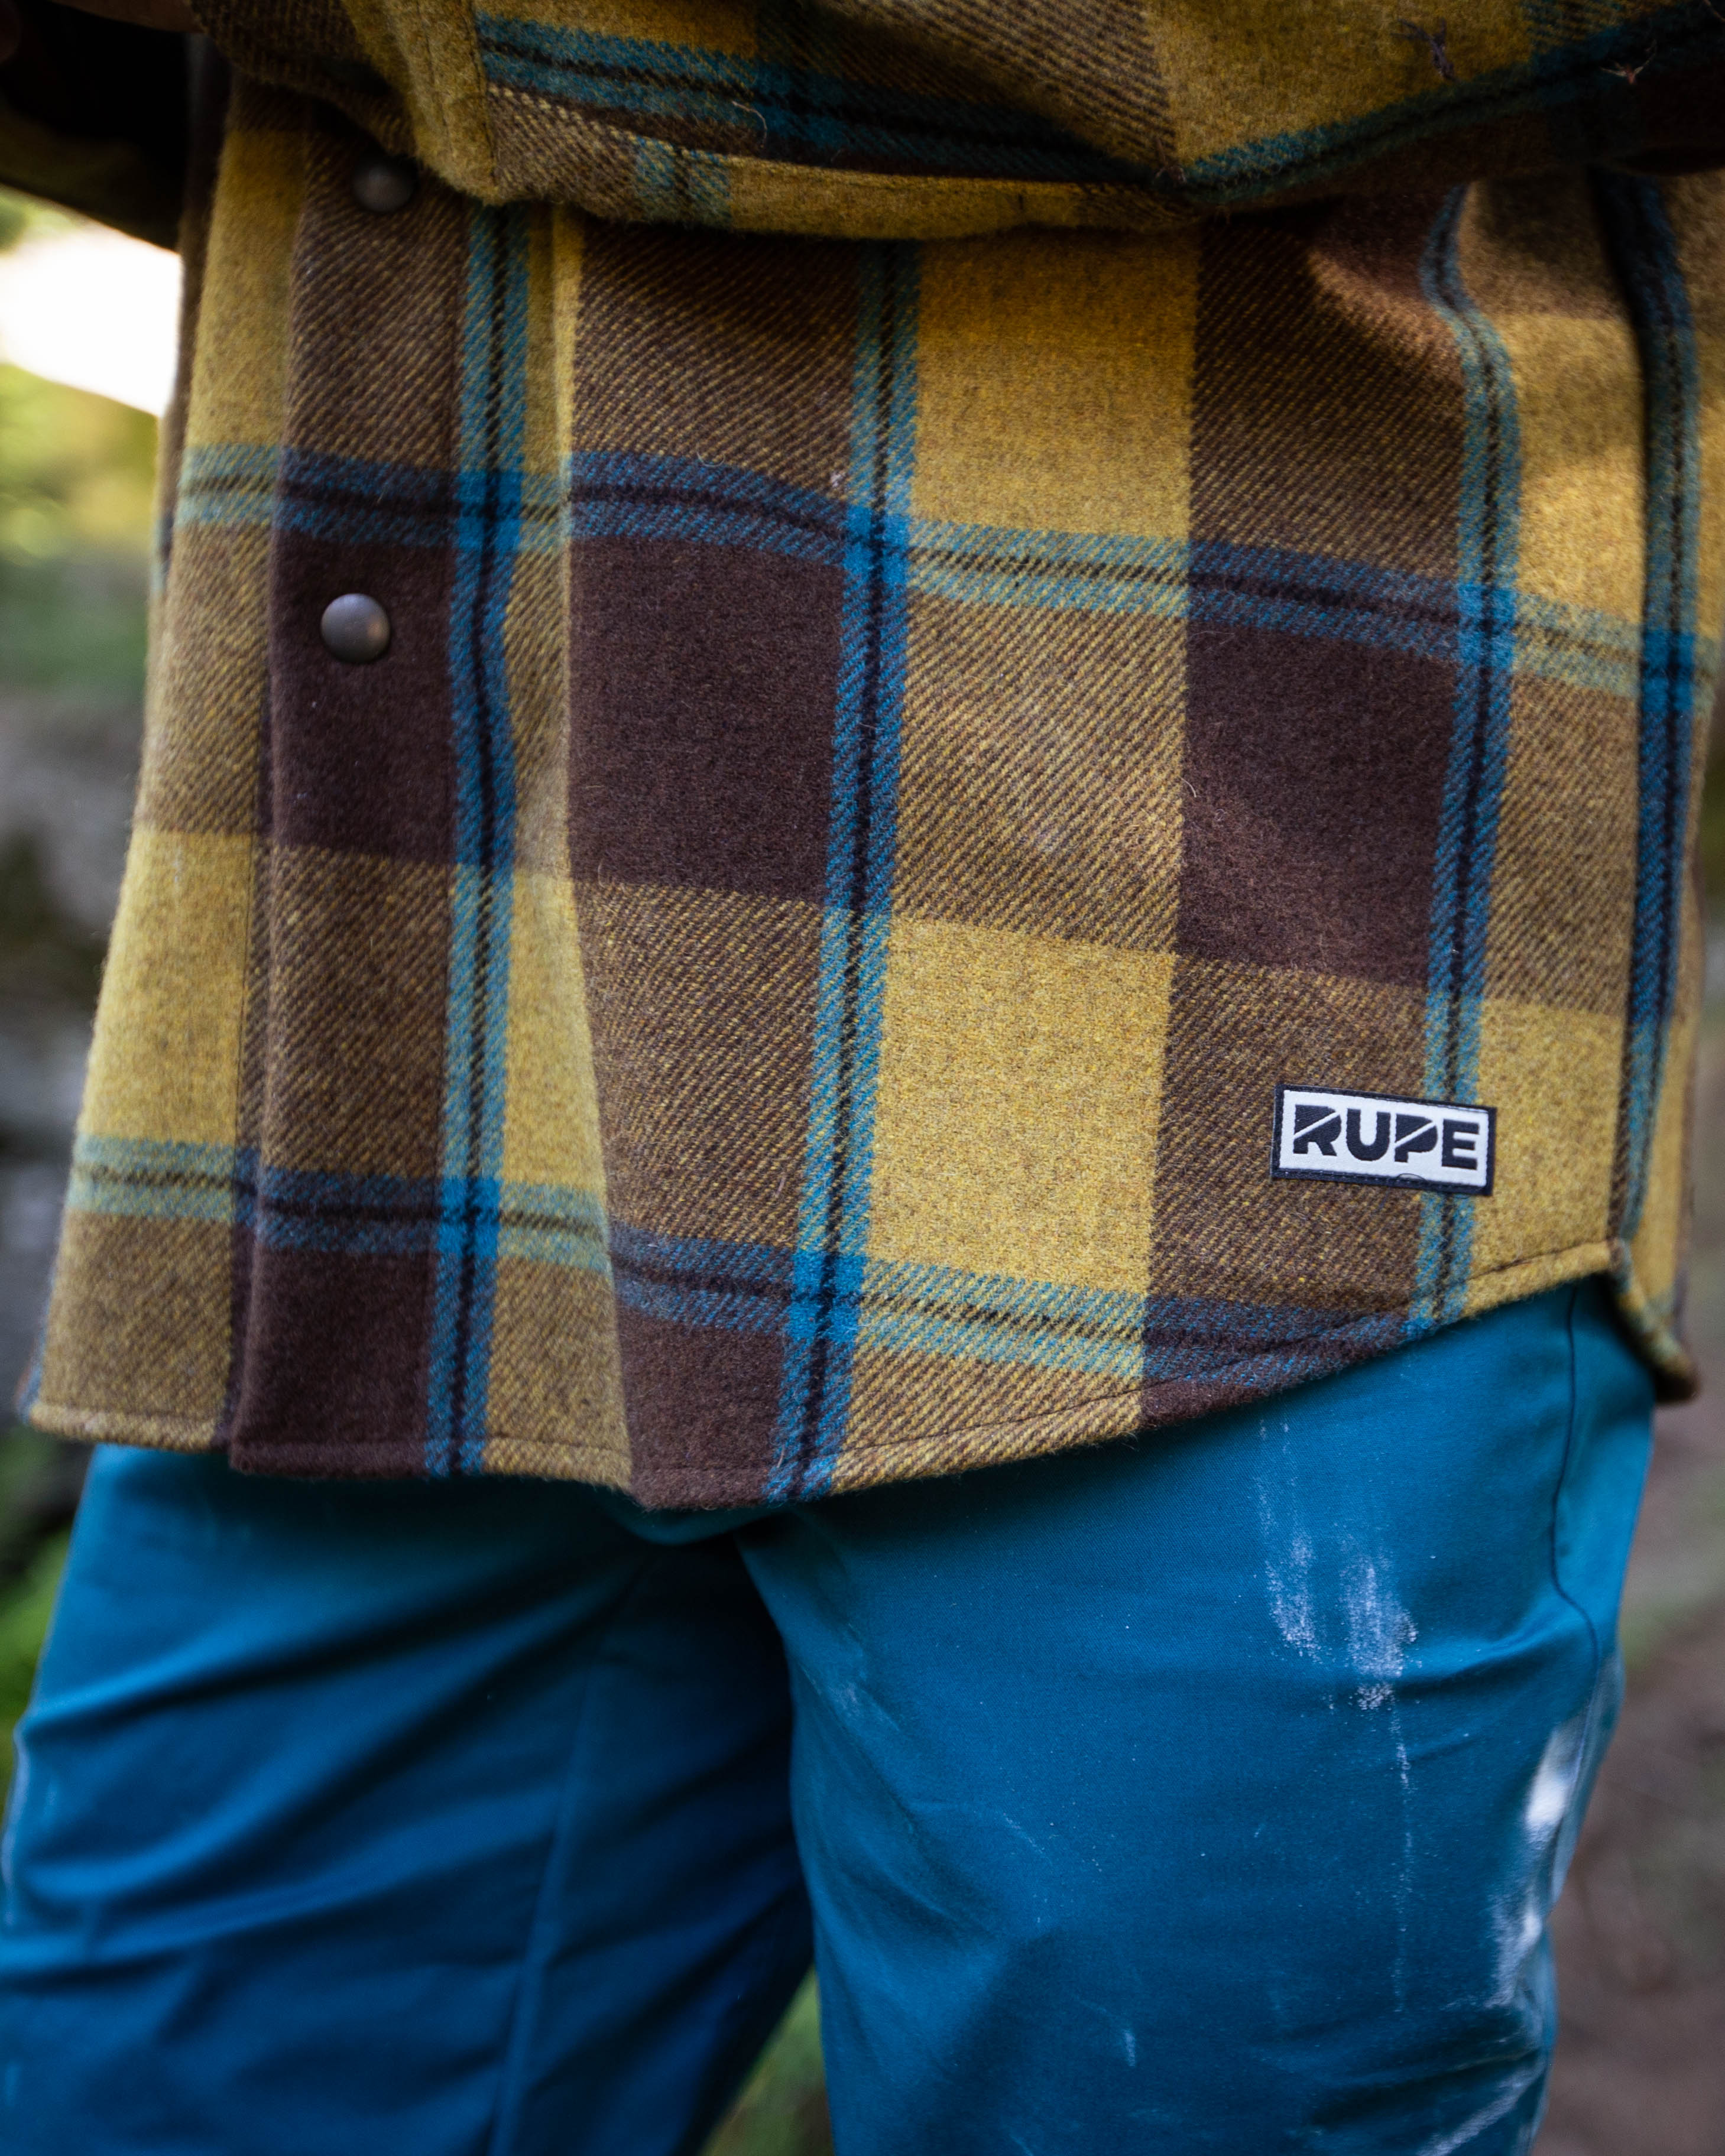 Rupe Checked Wool Flannel Shirt - Winter Elegance and Absolute Comfort